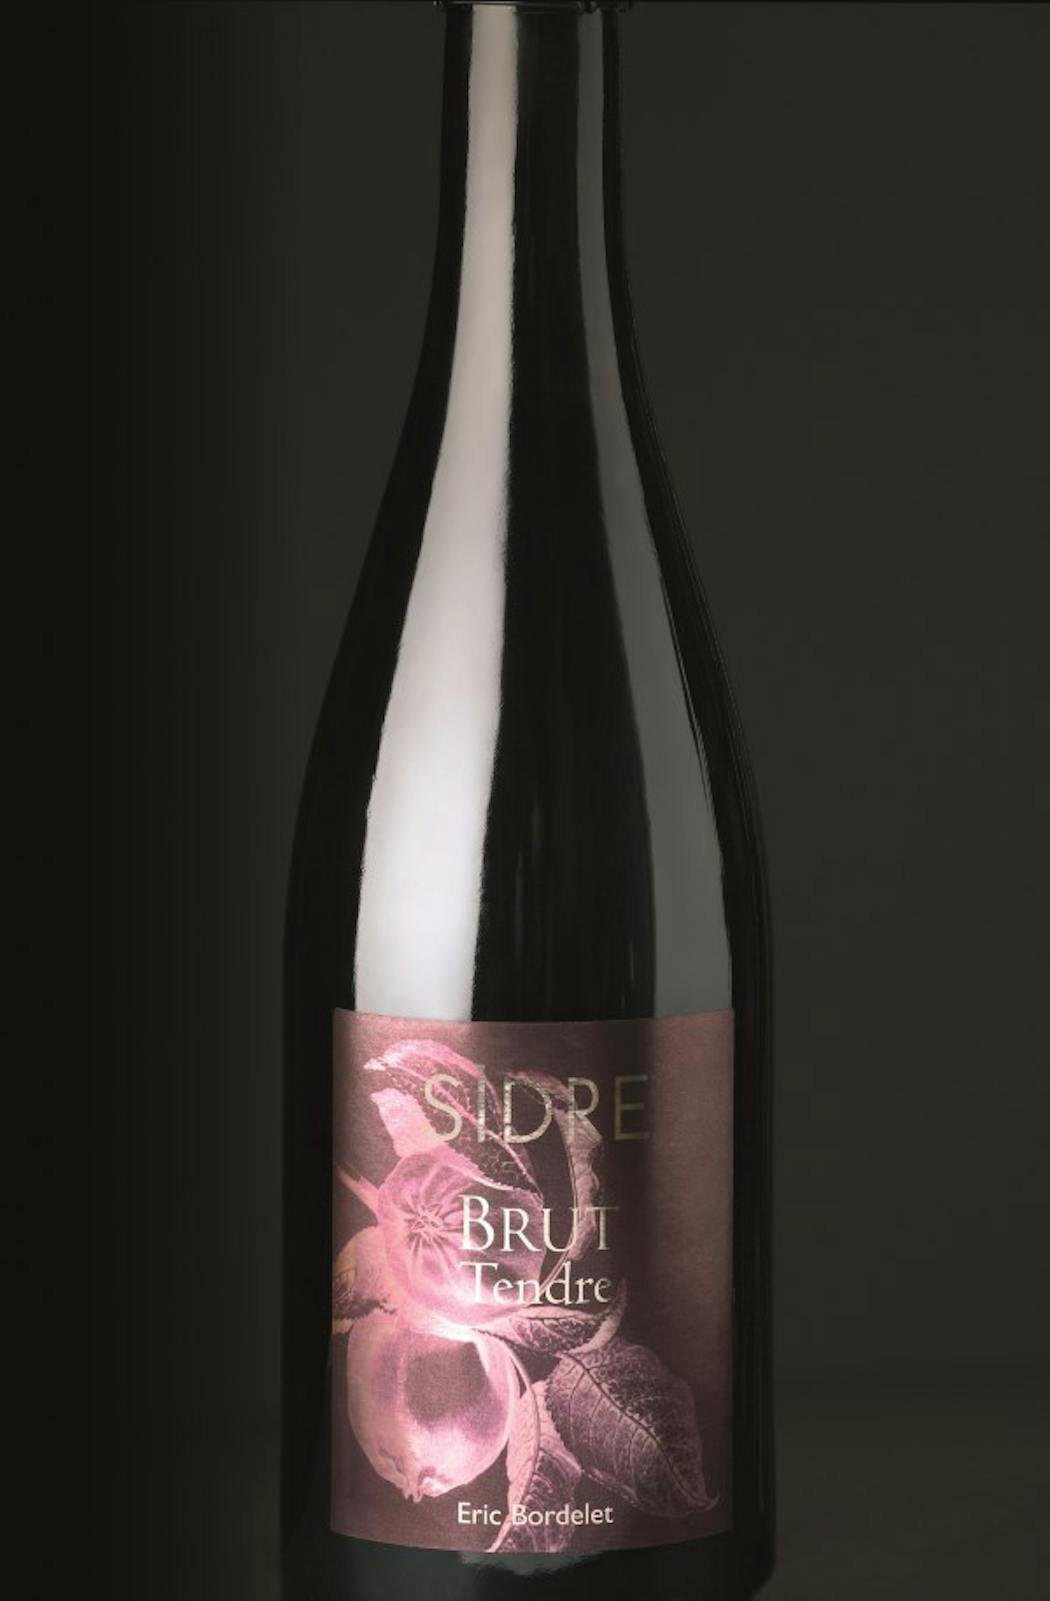 Sidre Brut Tendre is billed as semisweet, but it’s lighter and brighter than many.